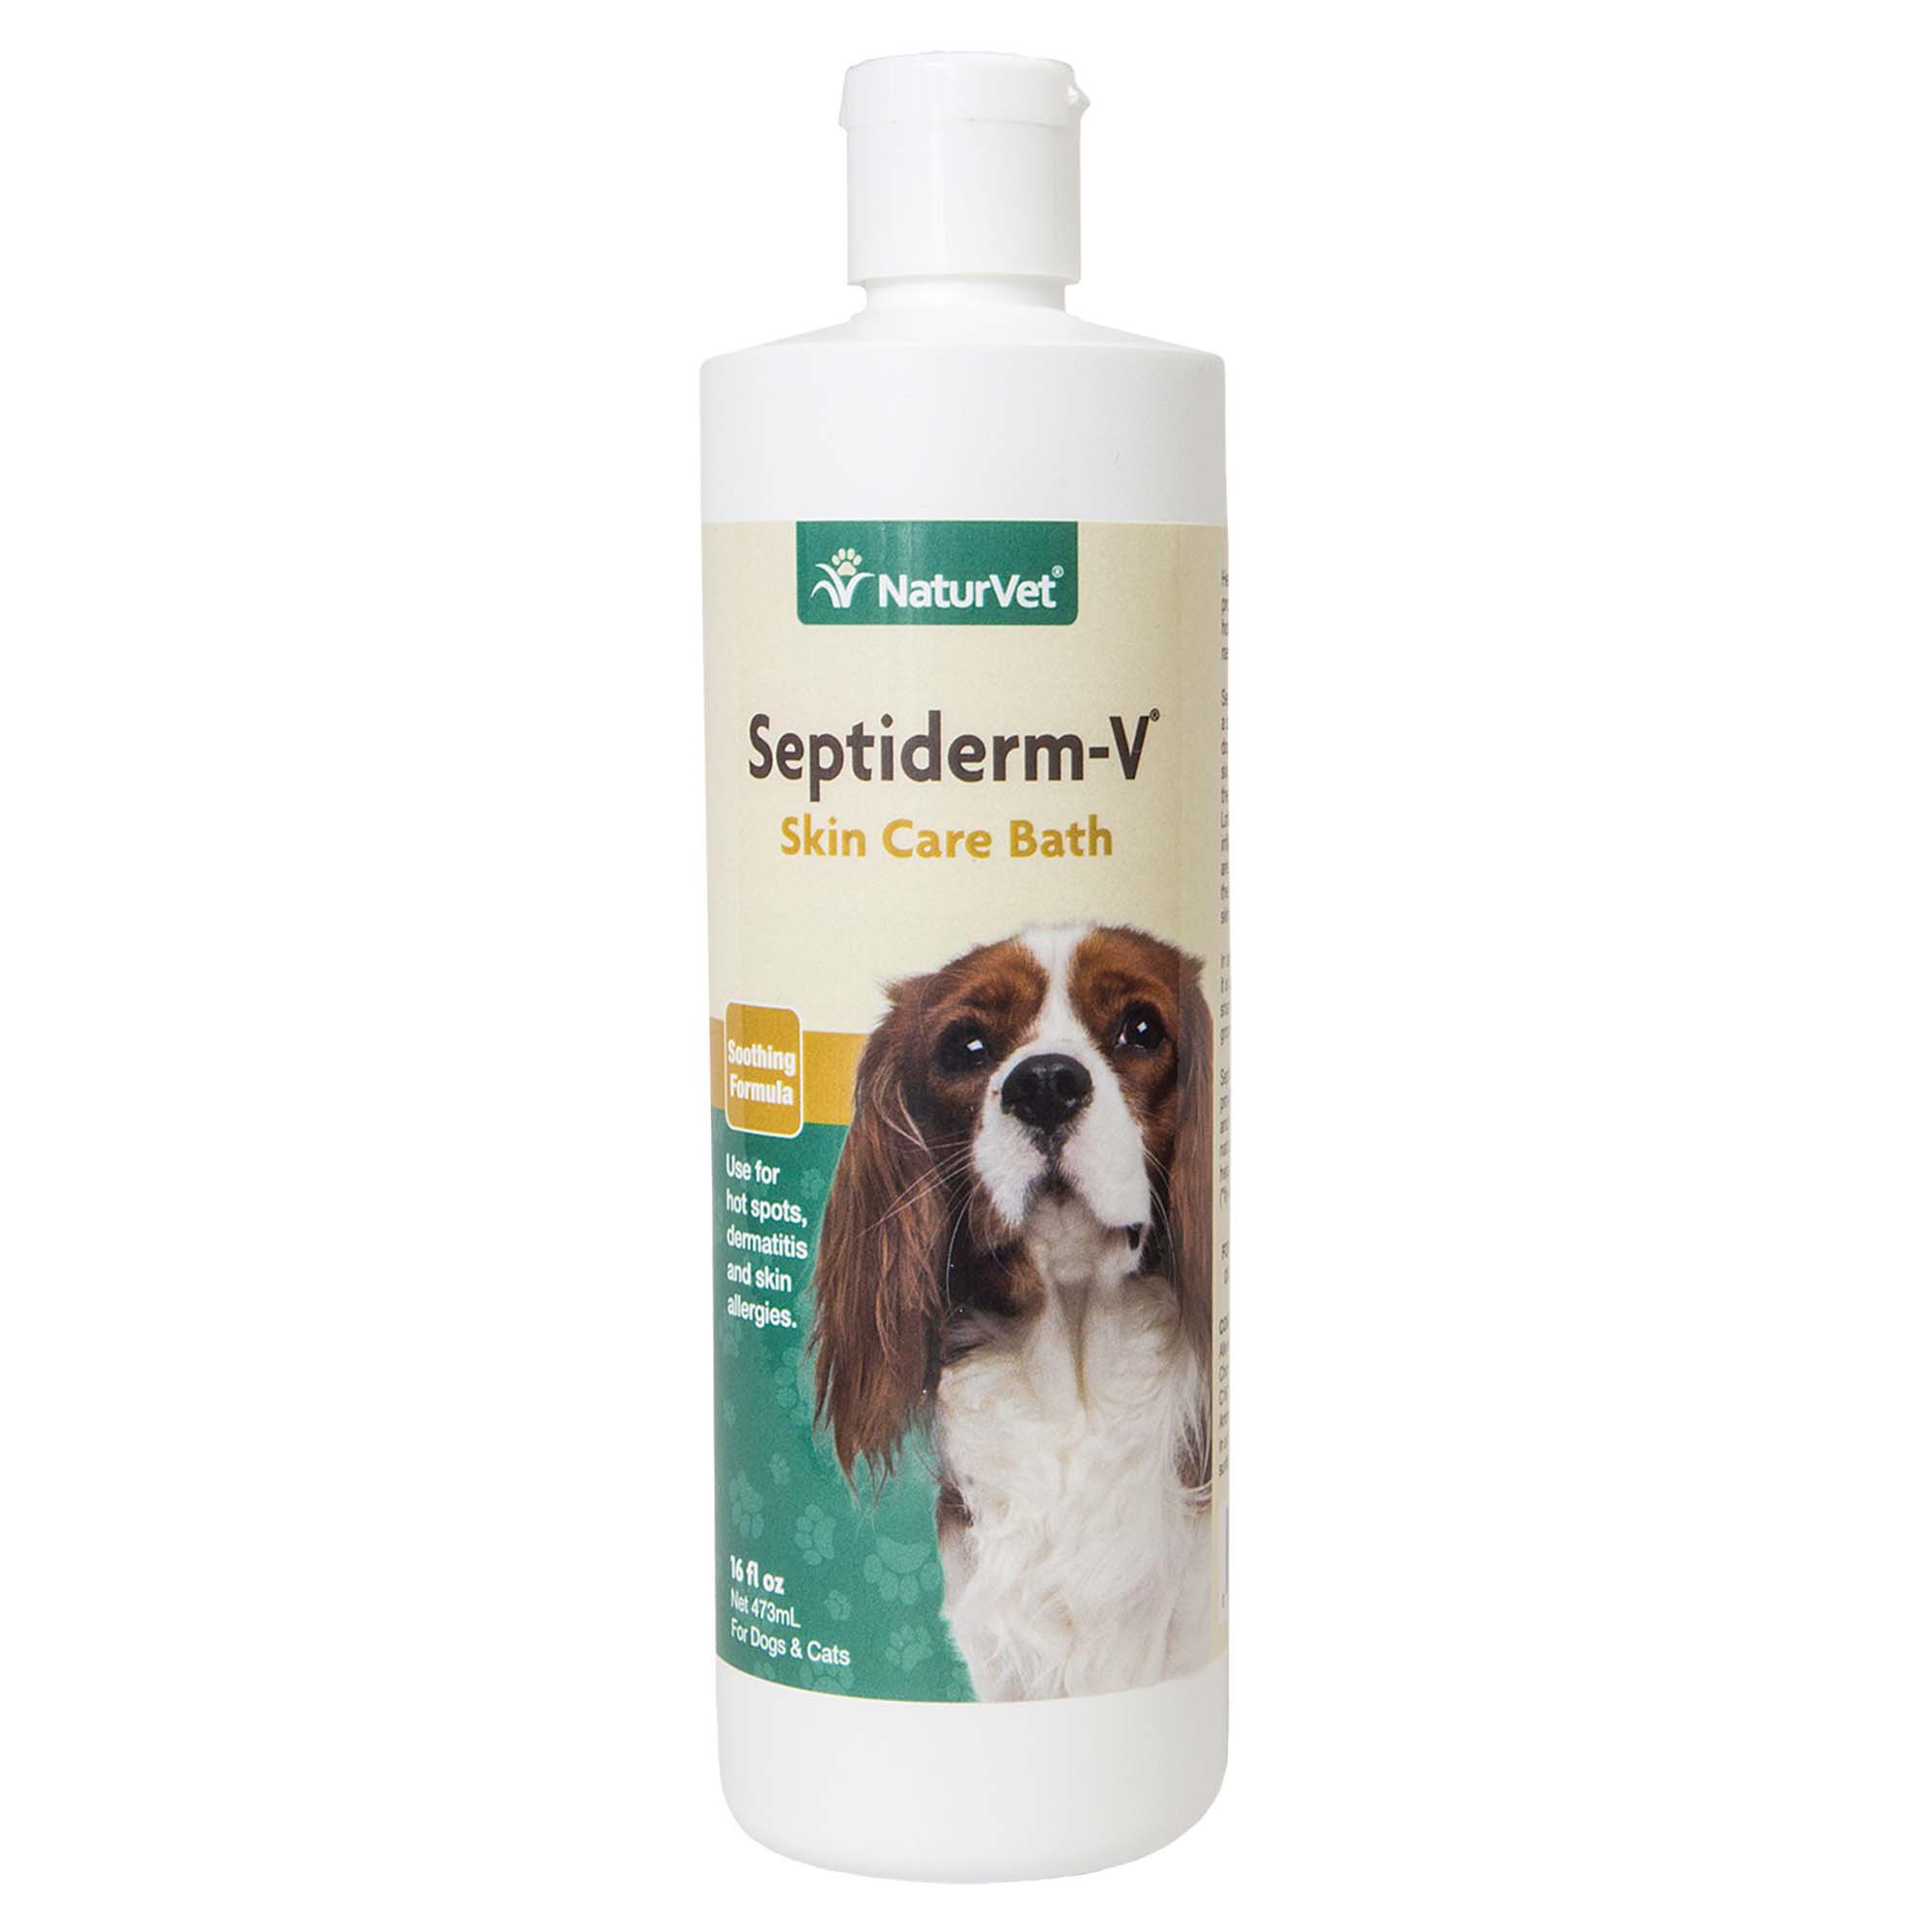 SeptidermV Antiseptic Skin Care Bath Grooming Shampoo for Dogs, Cats